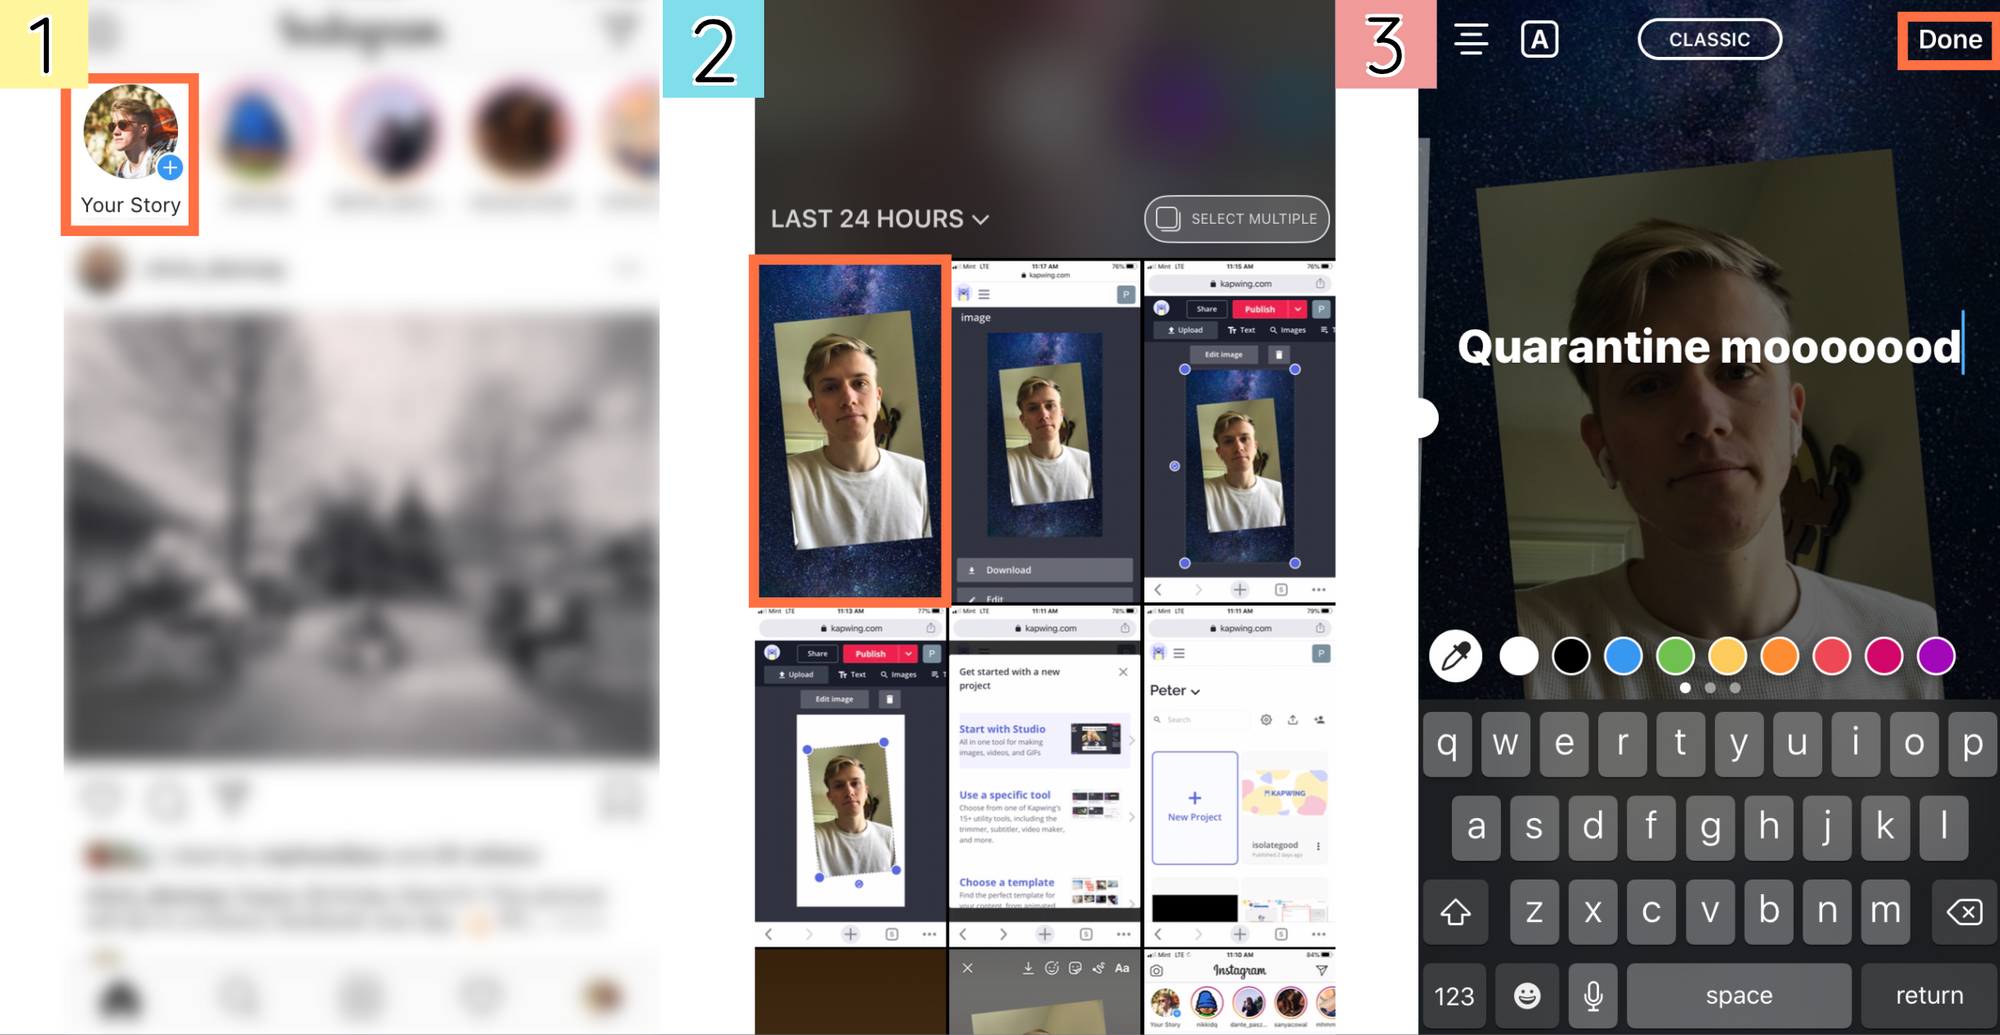 Screenshots showing how to add and edit Instagram Stories in the Instagram app. 